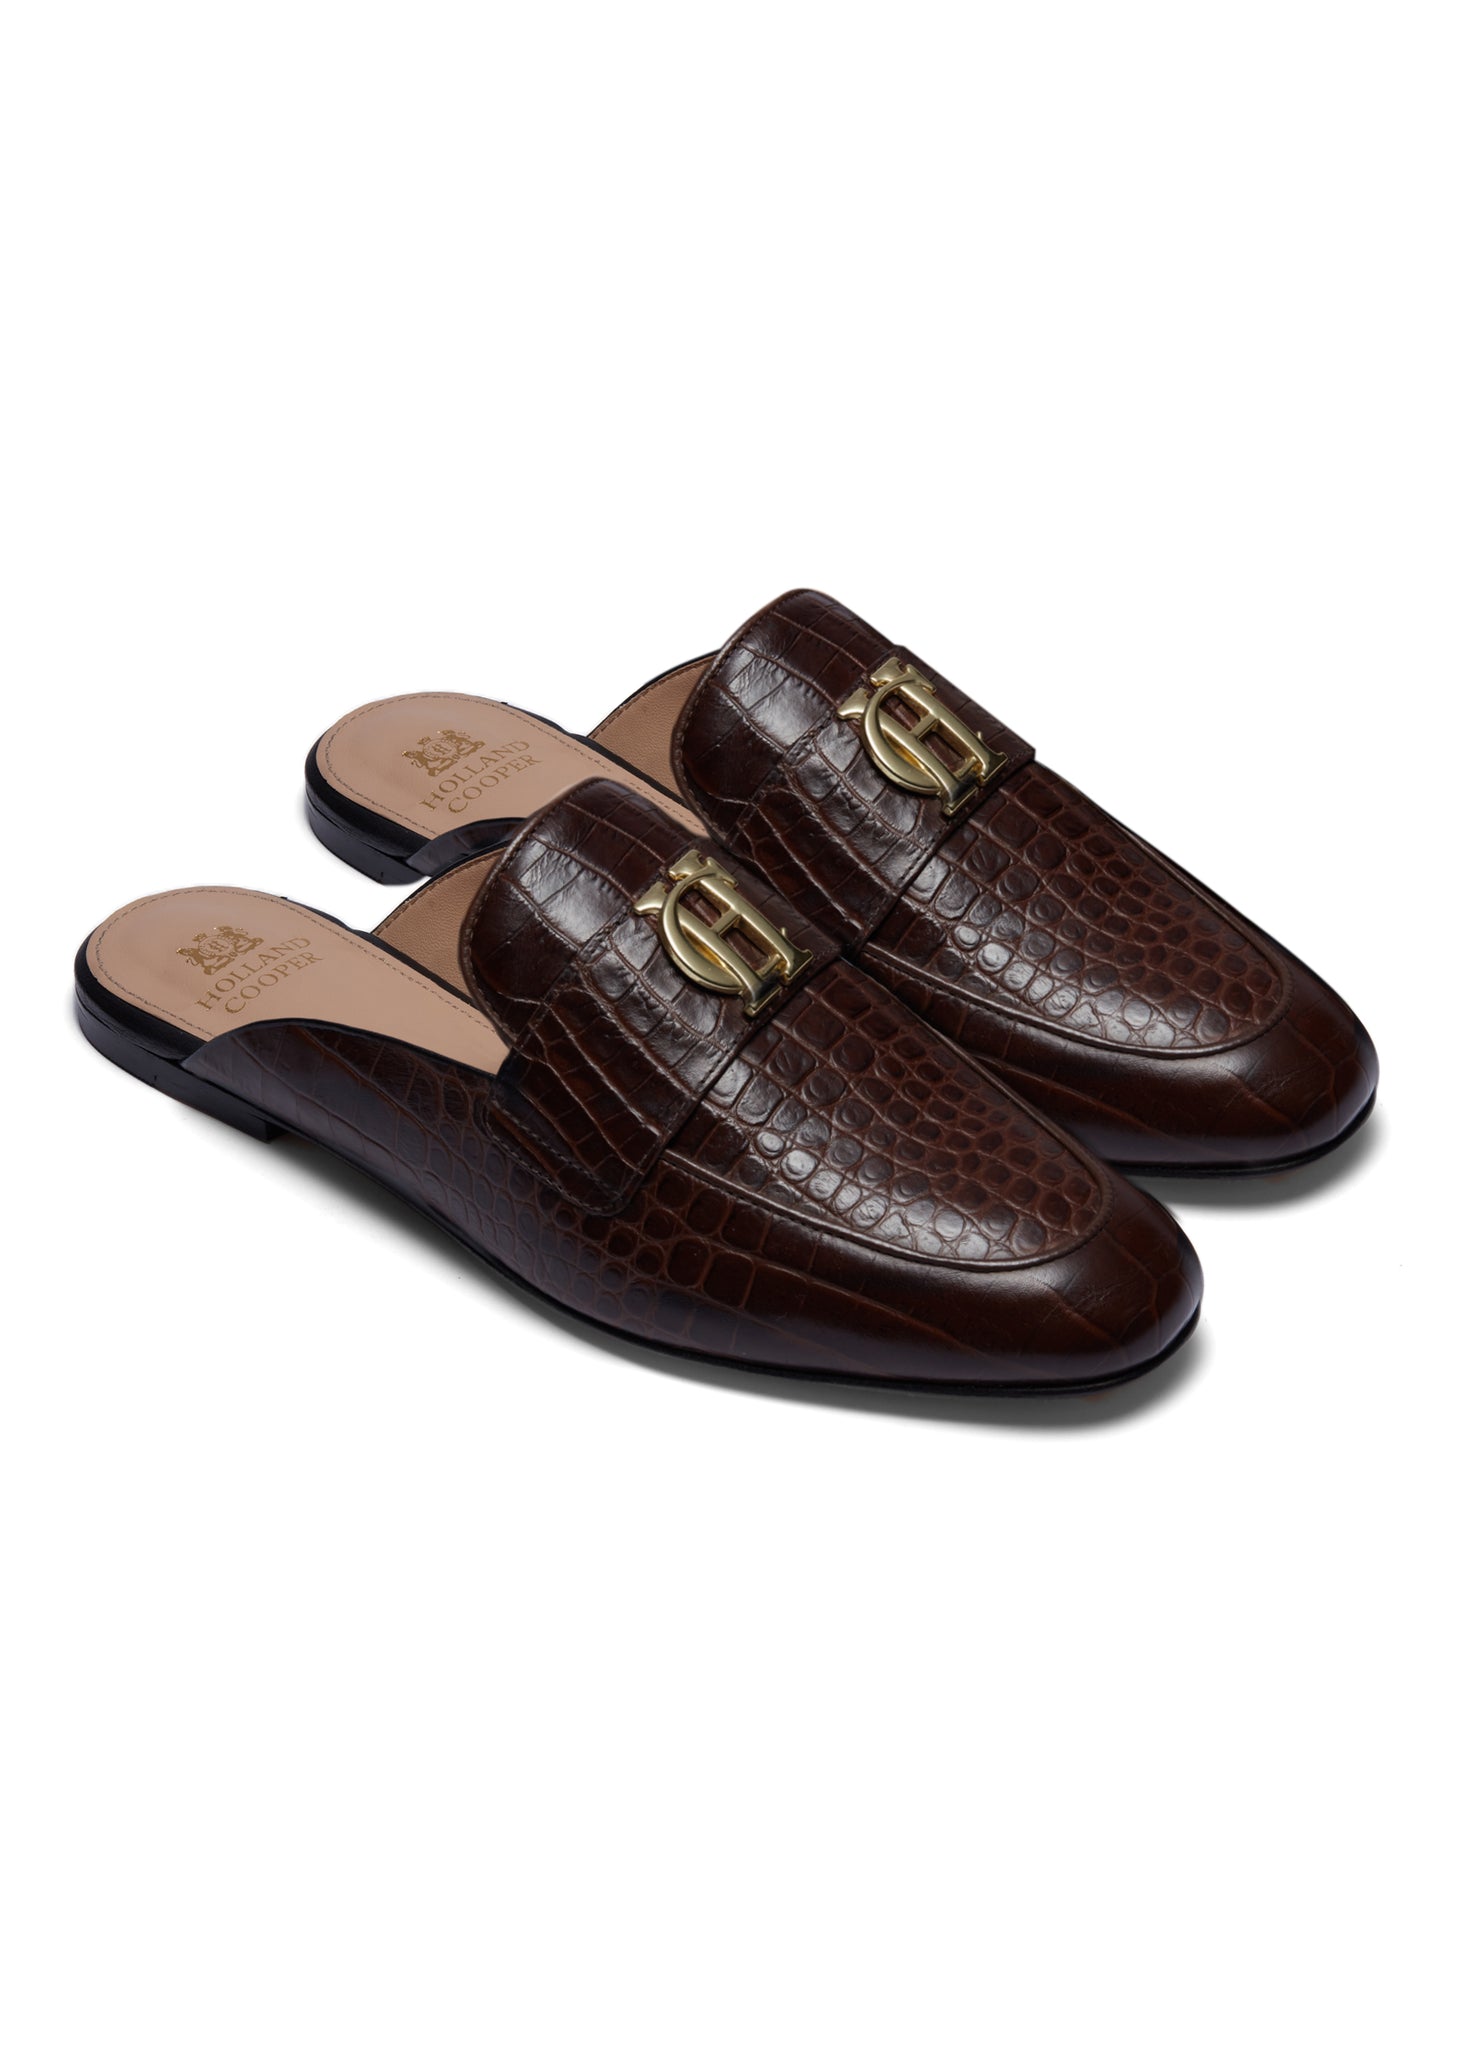 Side view of brown croc embossed leather backless loafers with a slightly pointed toe and gold hardware to the top and gold foil branding on the inner sole